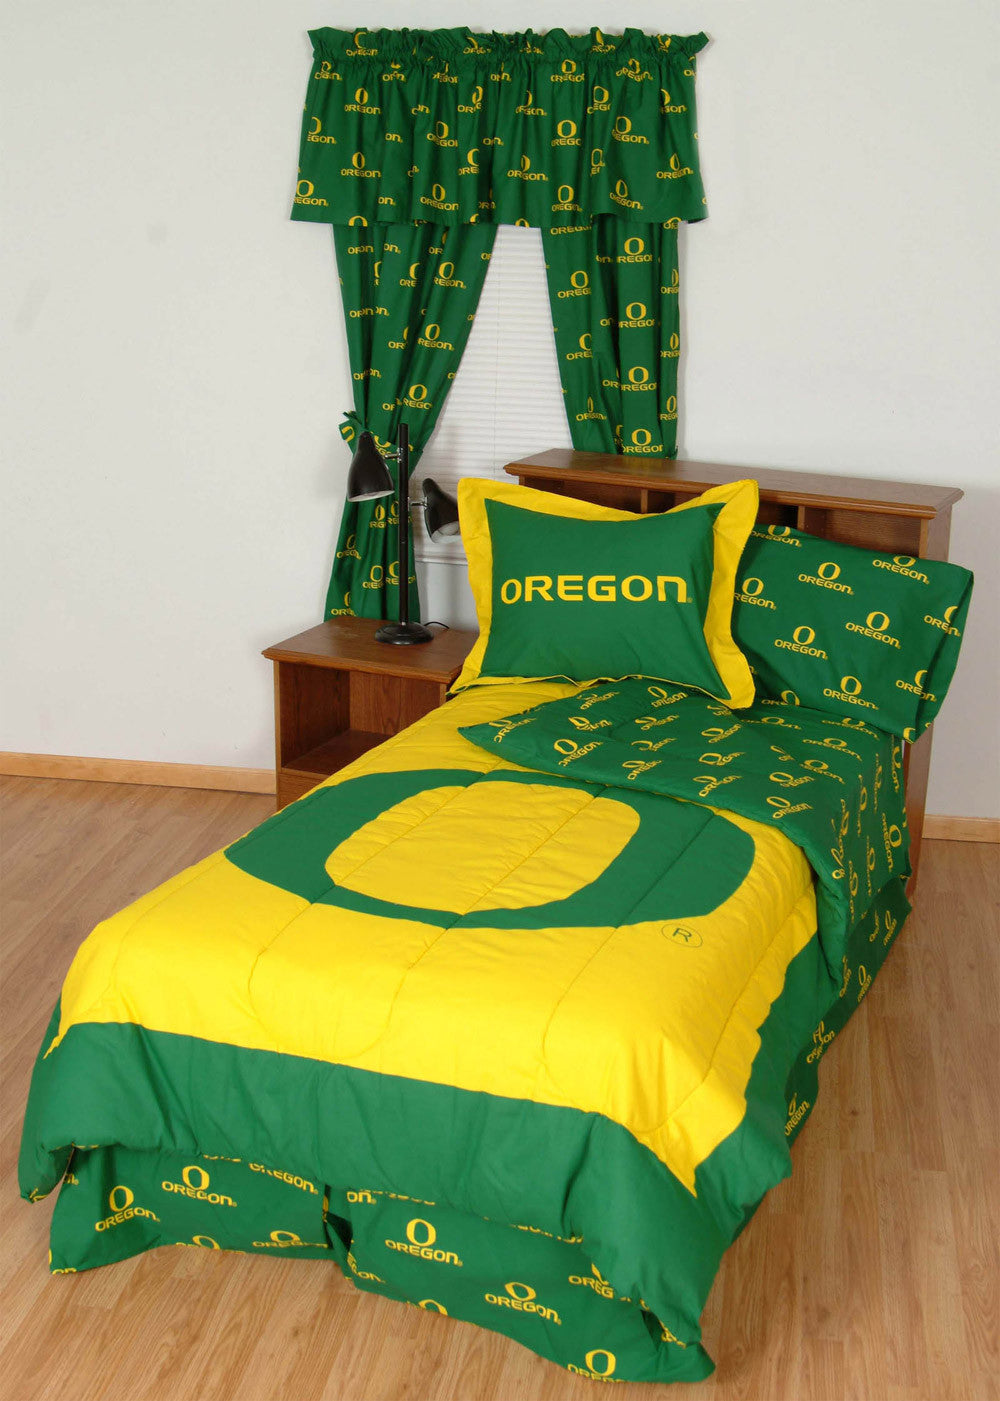 Oregon Bed In A Bag King - With Team Colored Sheets - Orebbkg By College Covers